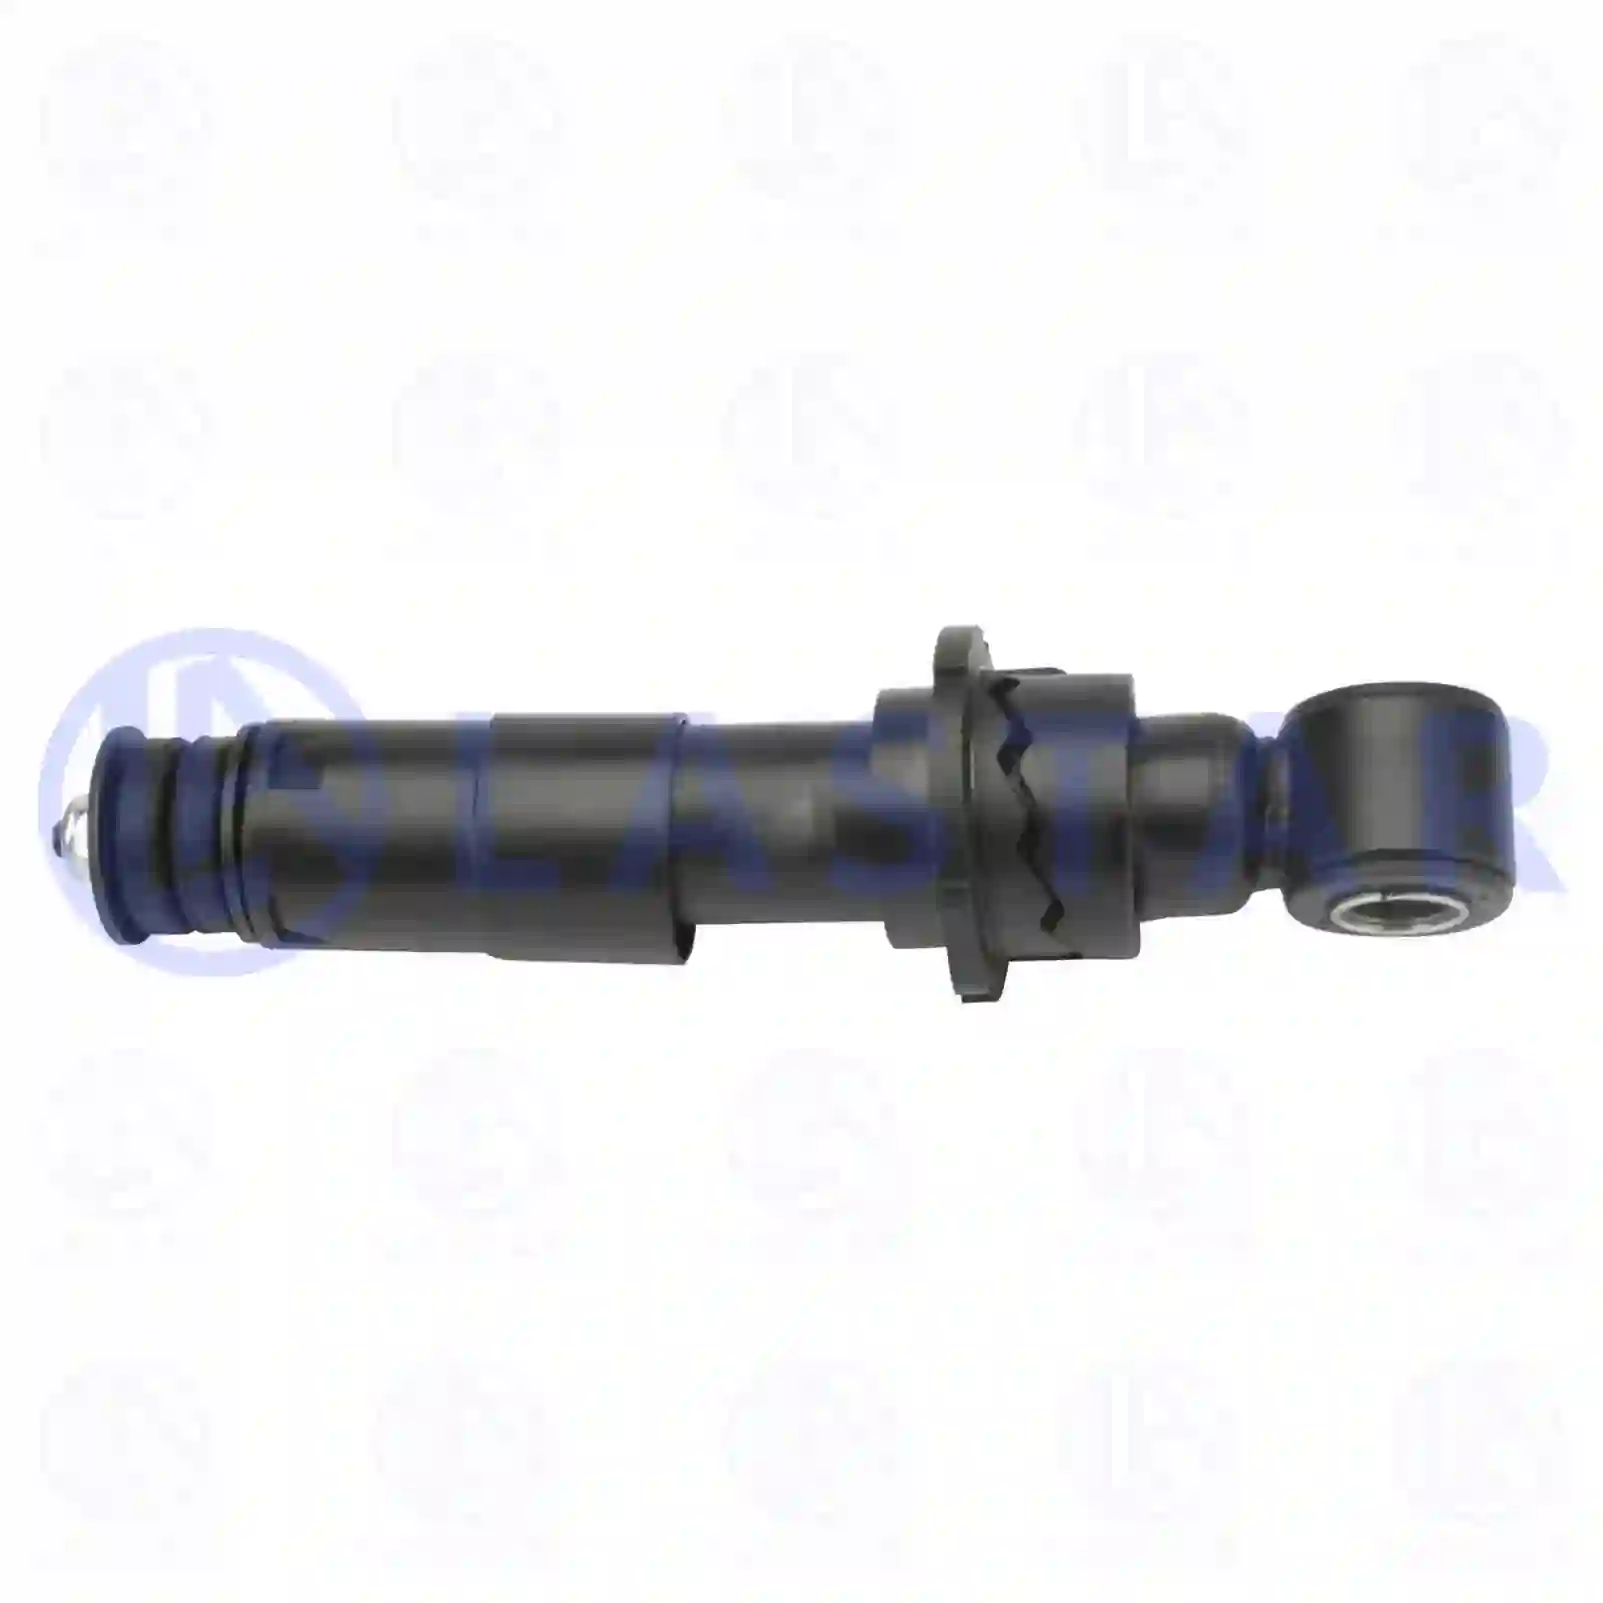 Cabin shock absorber, 77734733, 1075478 ||  77734733 Lastar Spare Part | Truck Spare Parts, Auotomotive Spare Parts Cabin shock absorber, 77734733, 1075478 ||  77734733 Lastar Spare Part | Truck Spare Parts, Auotomotive Spare Parts